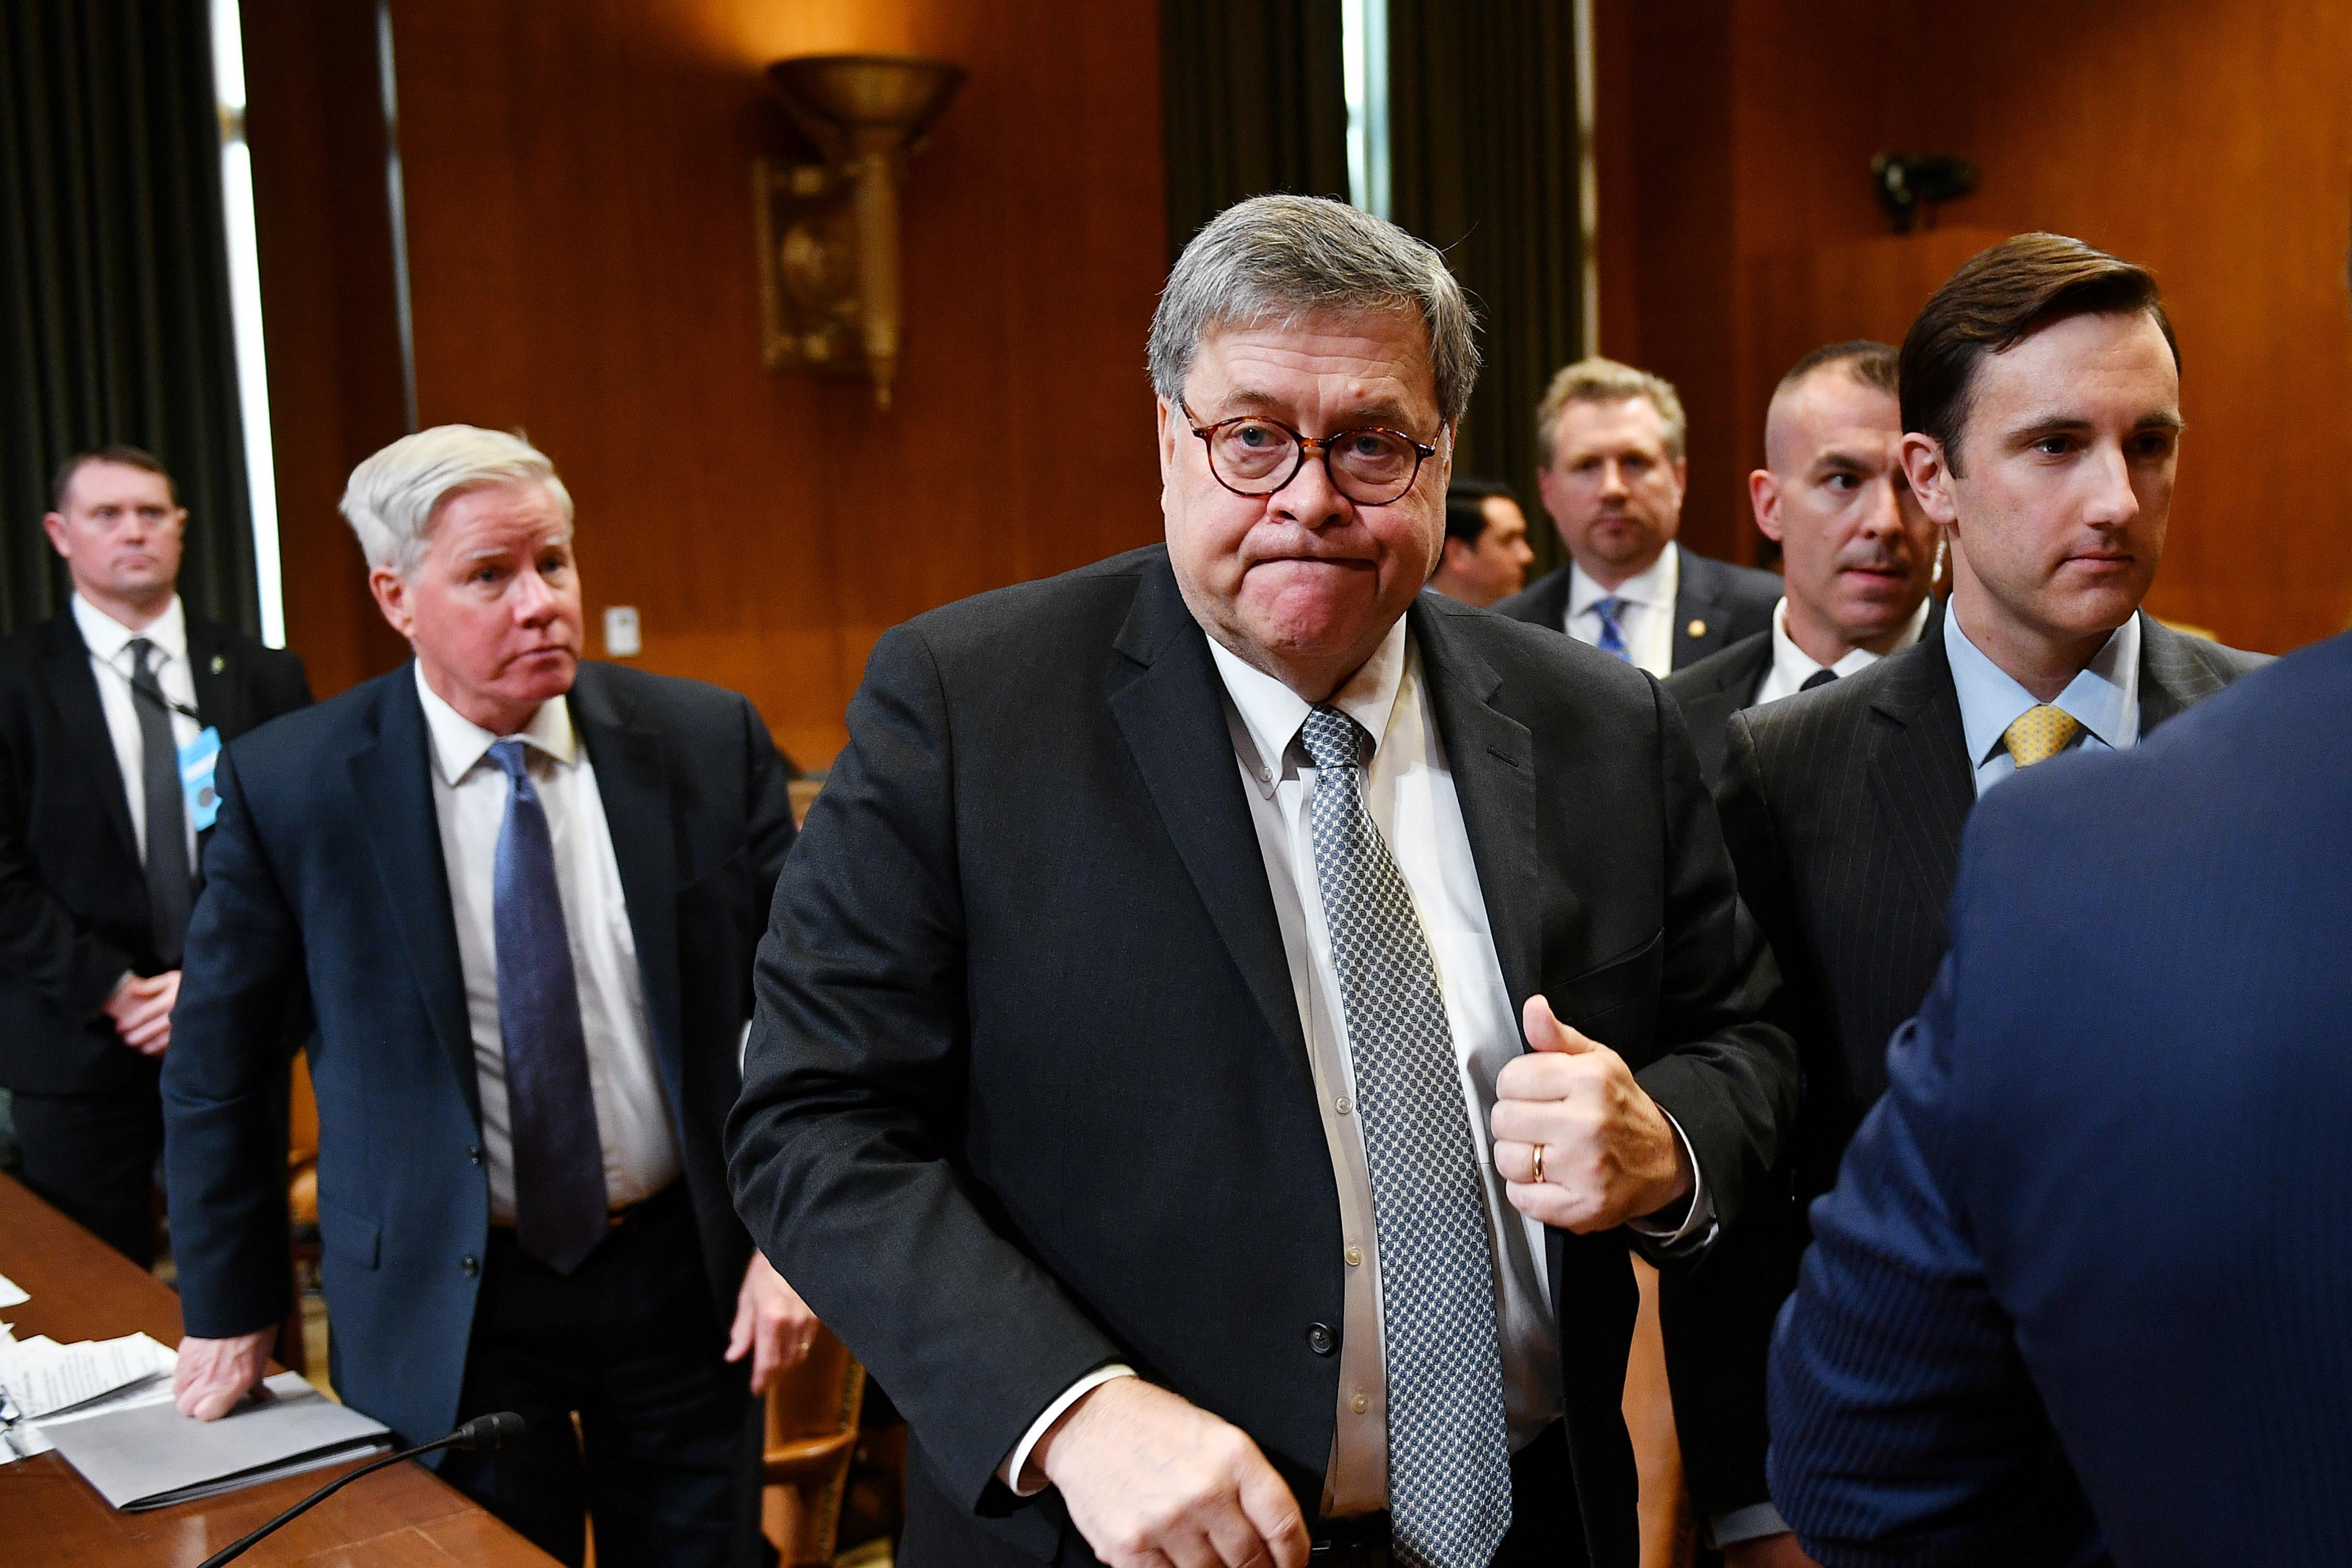 Attorney General William Barr is seen during a hearing on the Department of Justice Budget Request for fiscal 2020, on Capitol Hill on Wednesday.